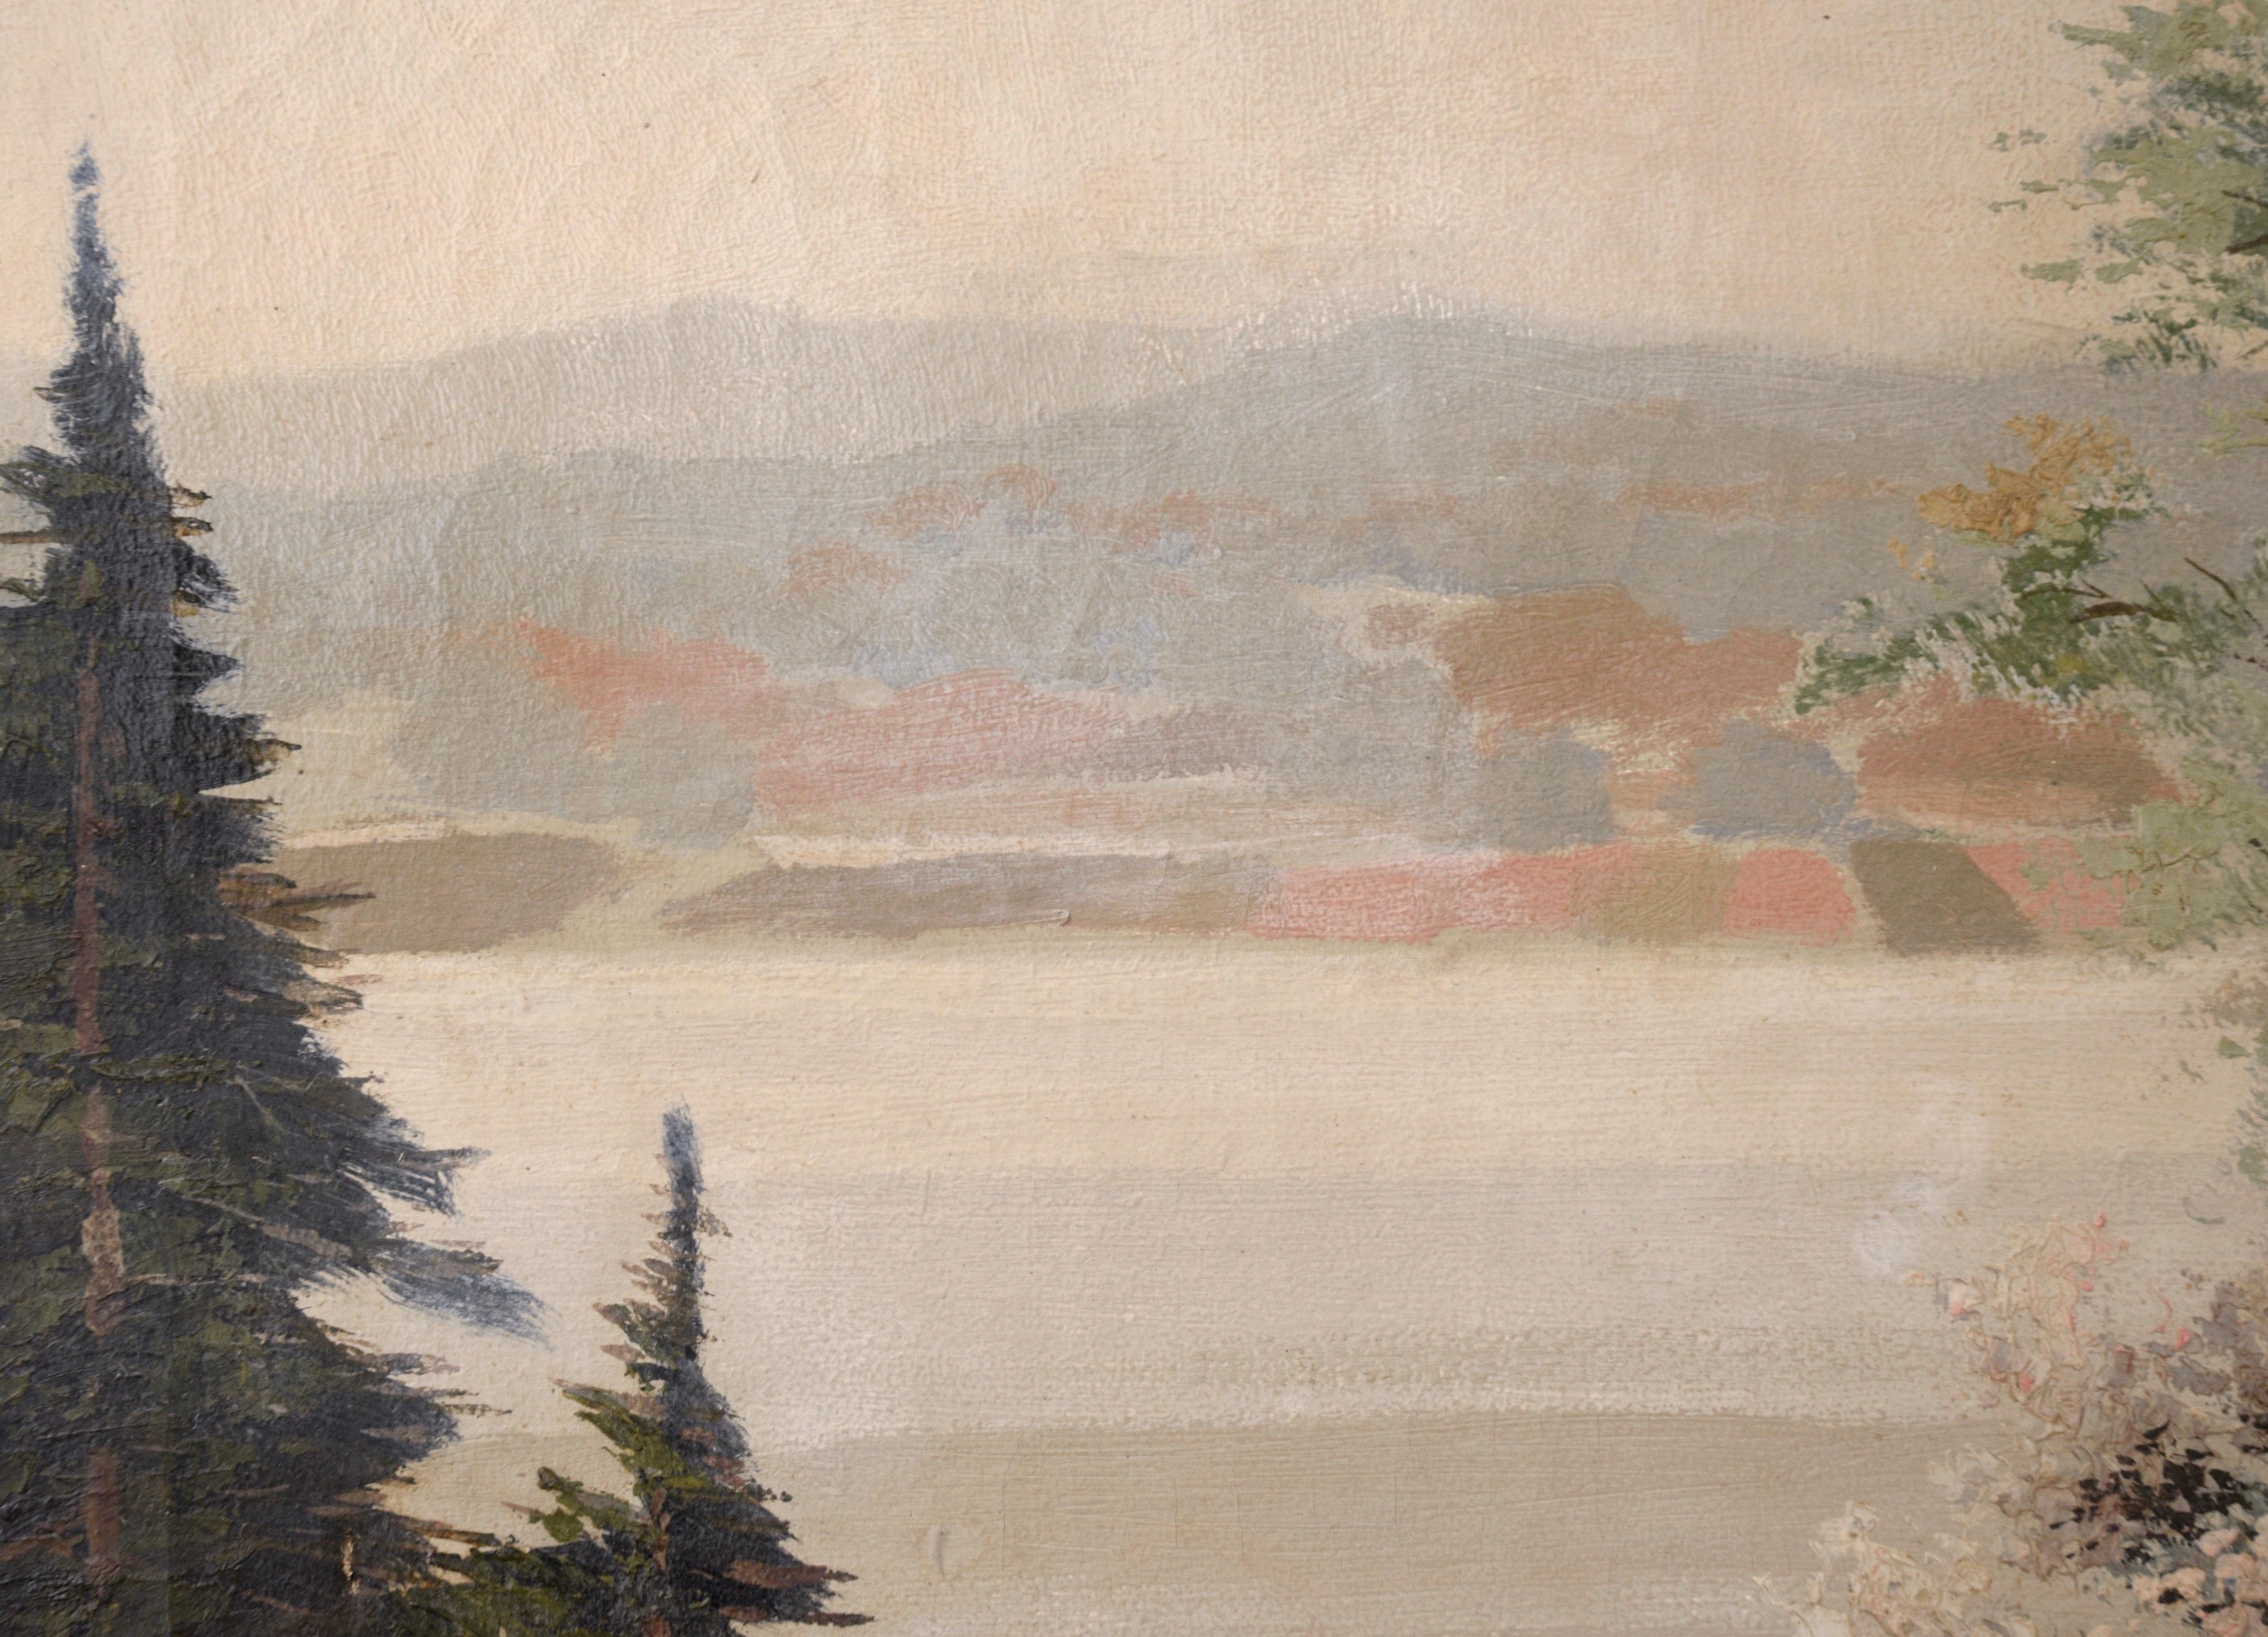 Hill Looking Over the Water, Early 20th Century Landscape by Paul Kujal

Serene depiction of a hill looking out over the water by Paul Kujal (Austrian, 1888-1965). In this beautiful early 20th century spring time scene, a grassy hillside on the